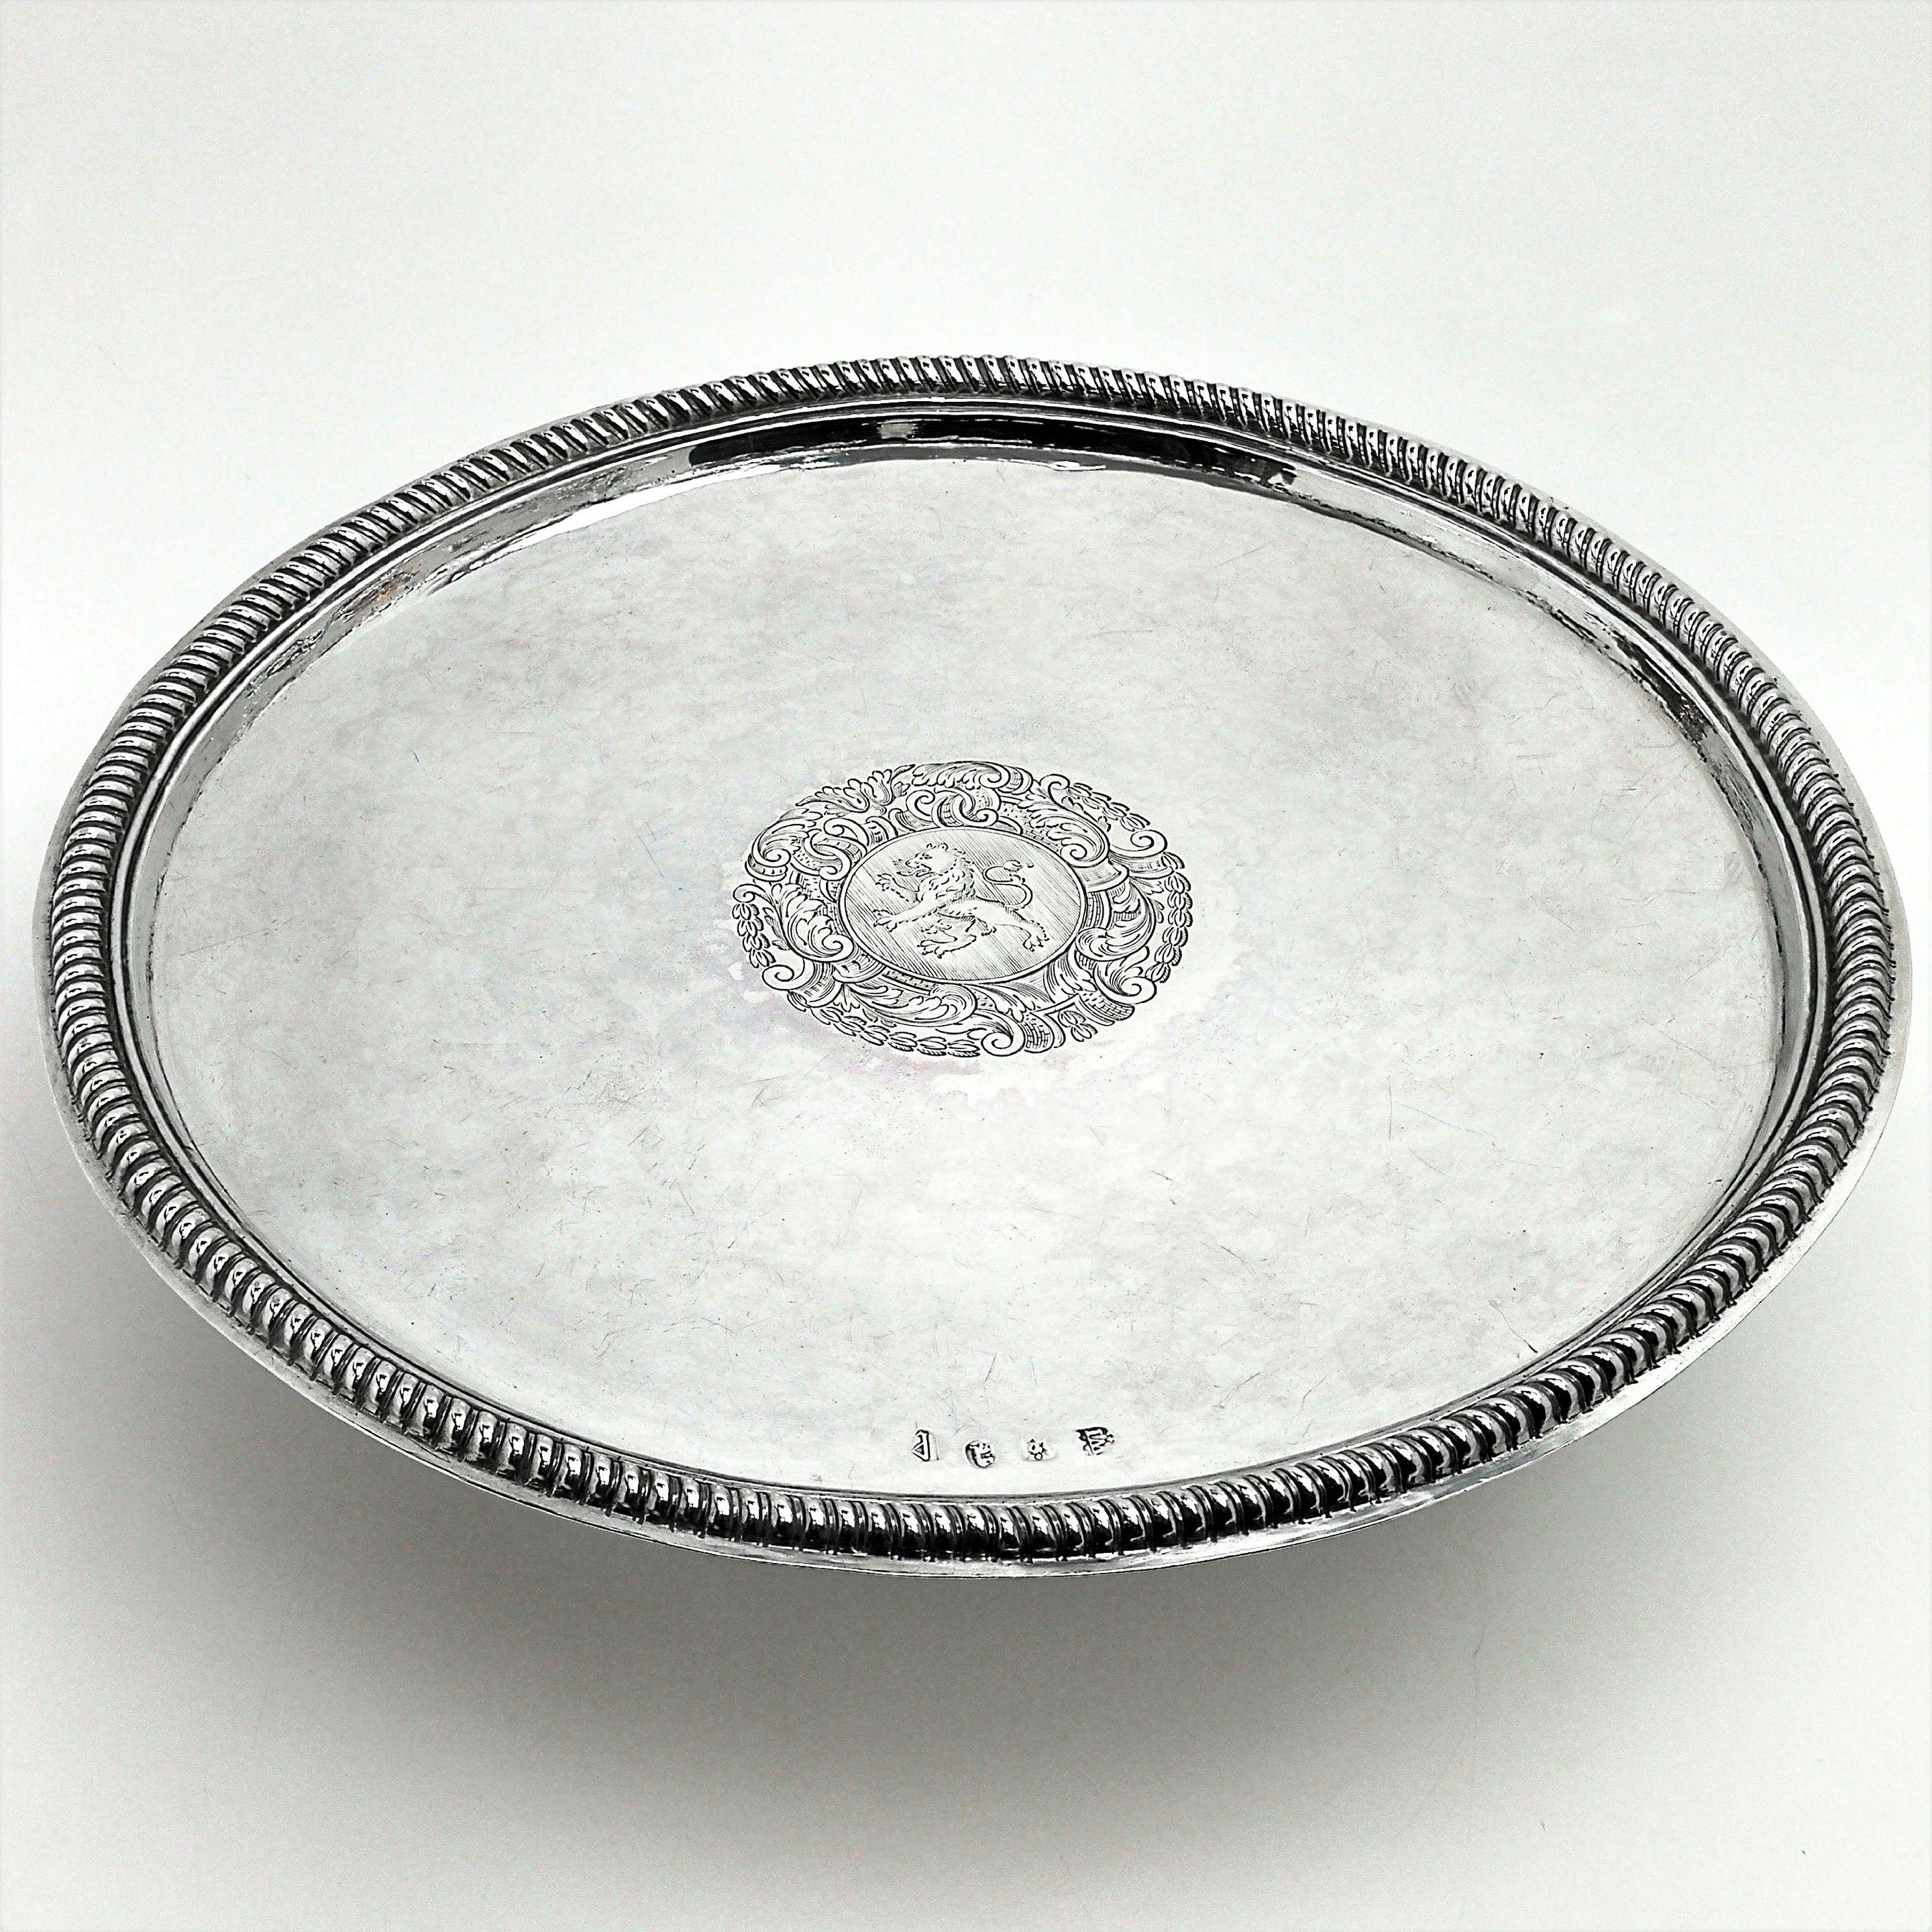 A magnificent Queen Anne solid silver tazza with an engraved crest in the centre. The rim of this antique tazza is embellished with a chased gadroon edge and the spread foot has a chased fluted design.
 
 Made in London in 1706 by John Wisdome.
 
